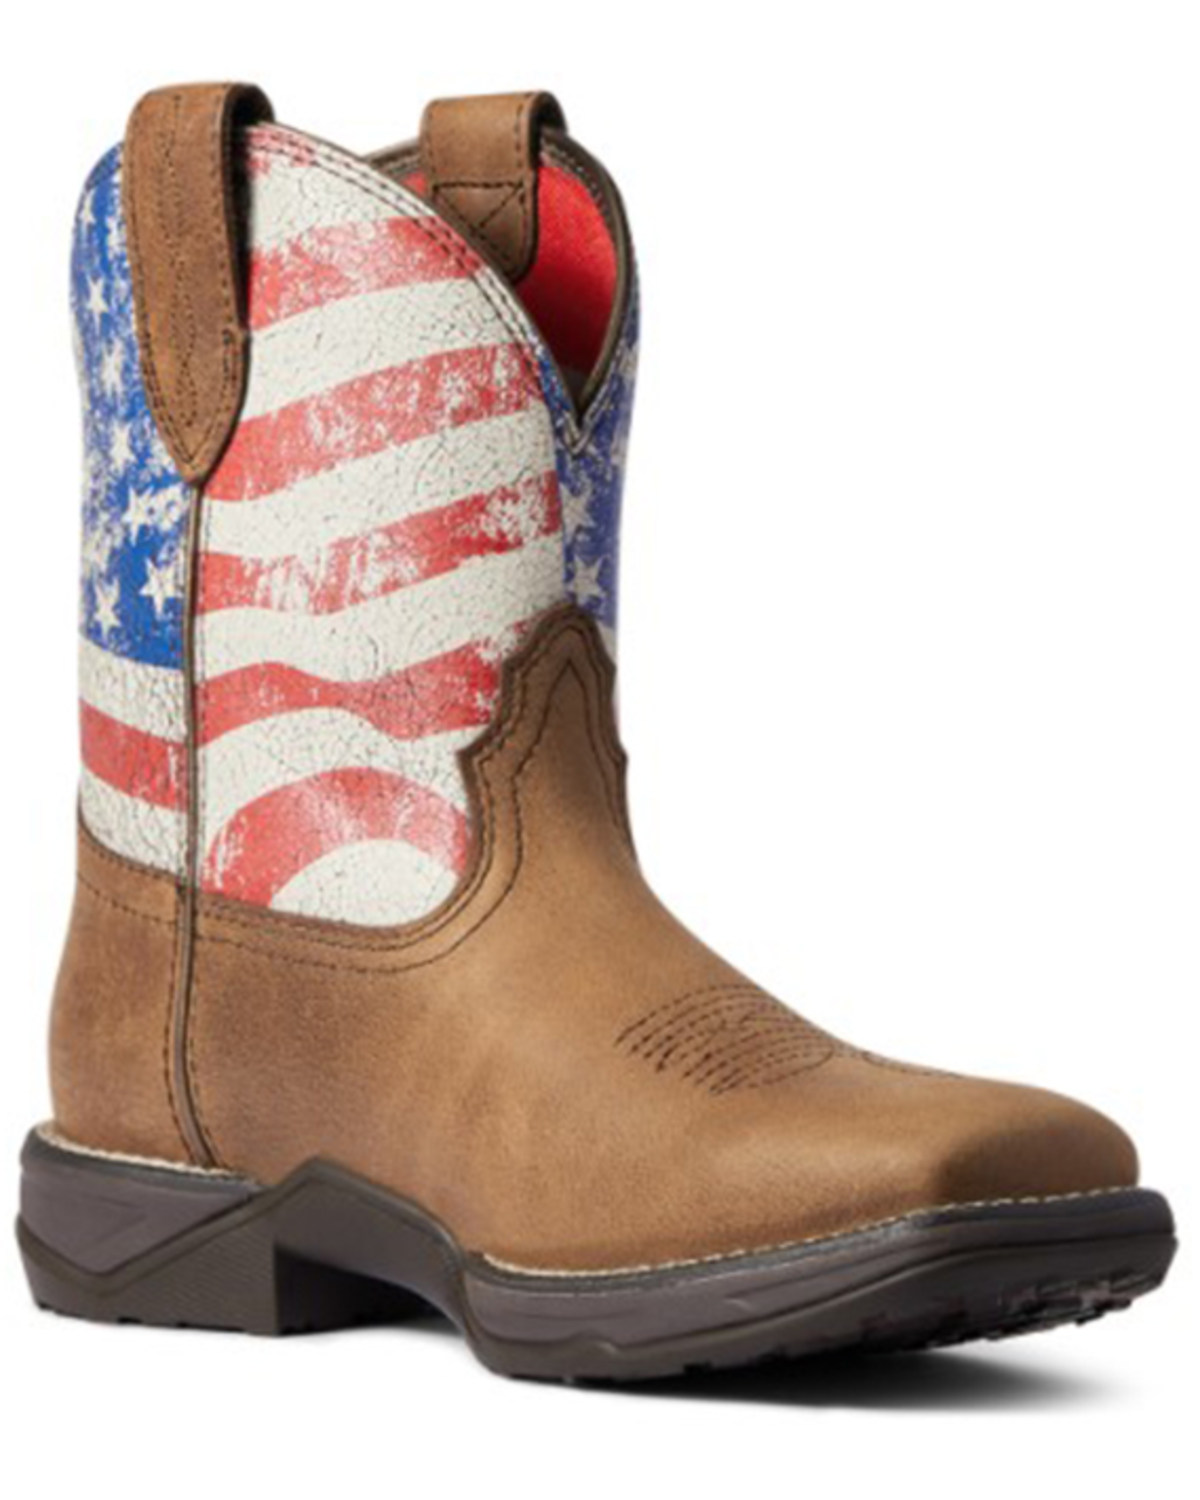 Ariat Women's Anthem Shortie Patriot Performance Western Boots - Broad Square Toe